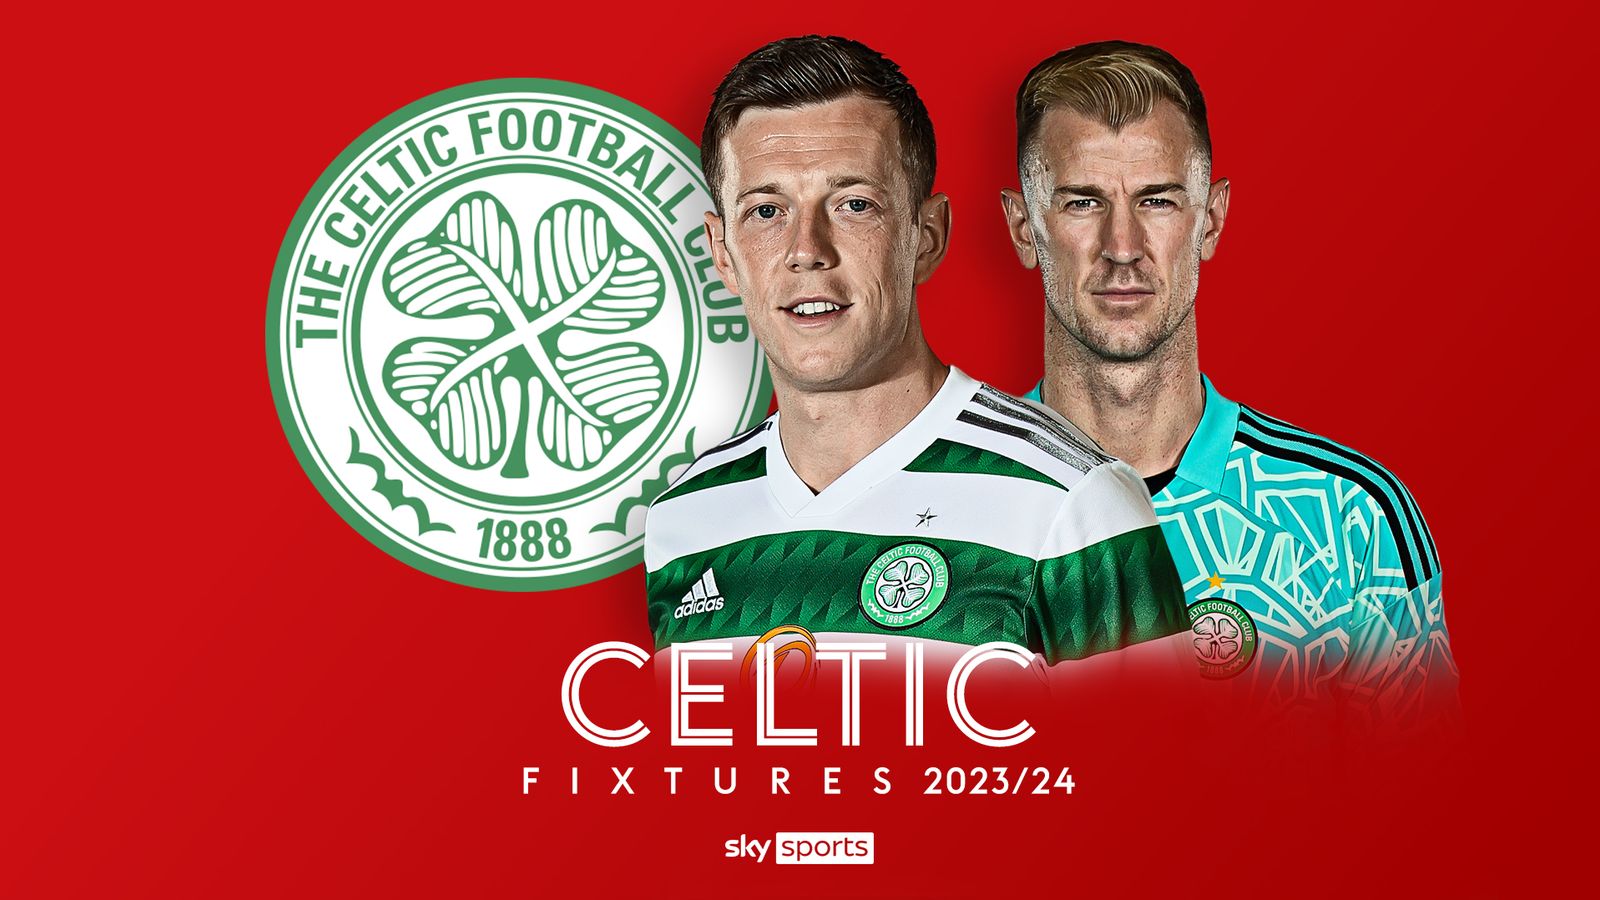 Celtic Scottish Premiership 2023/24 fixtures and schedule Football News Sky Sports